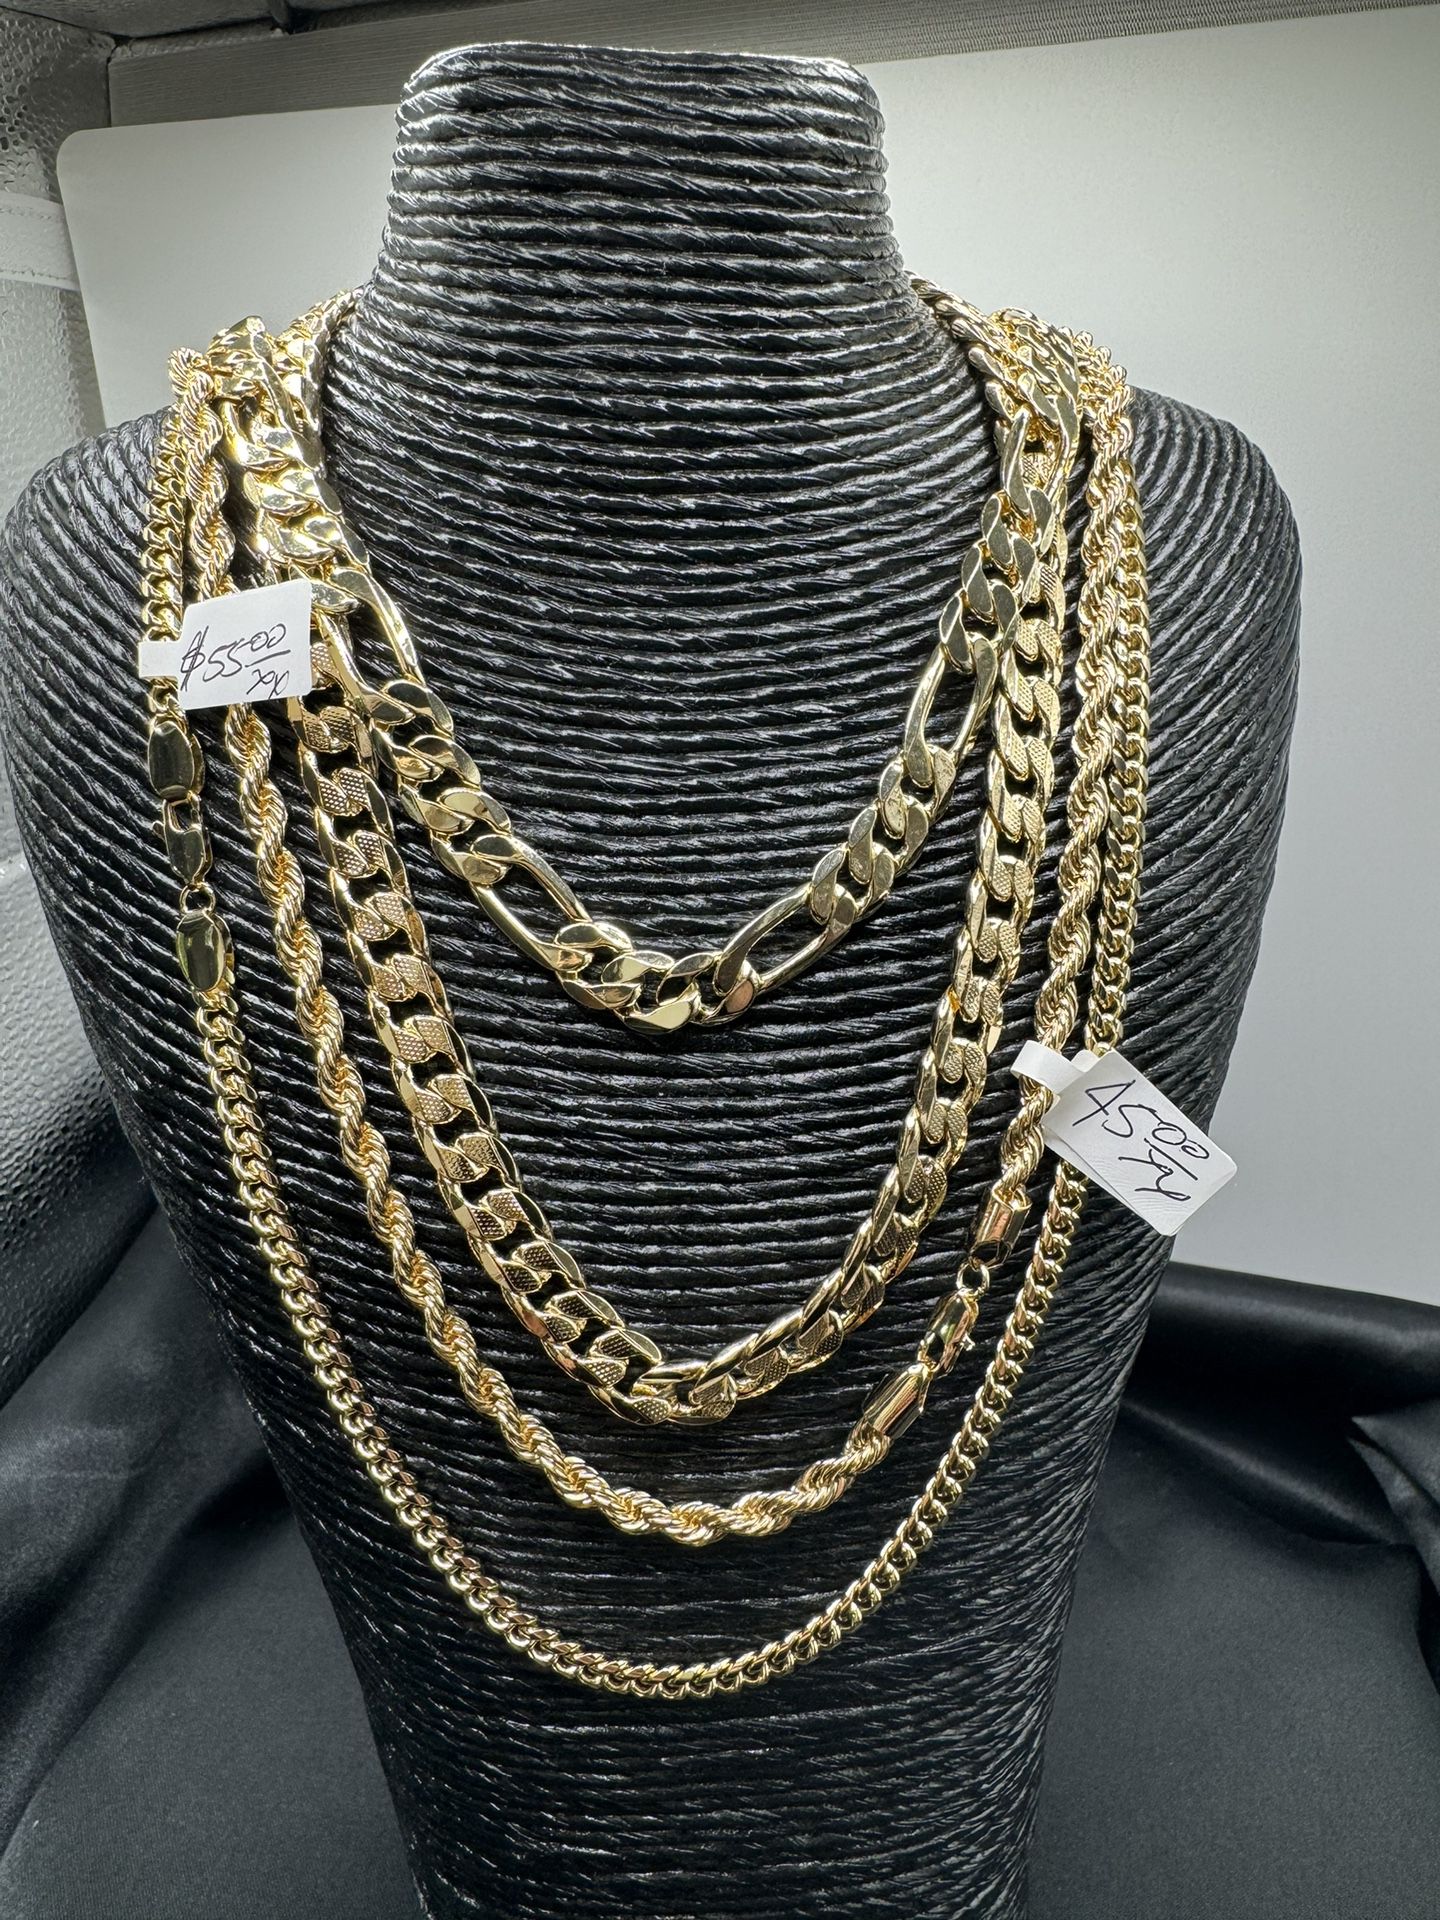 18K Gold Filled Chains And Bracelets.